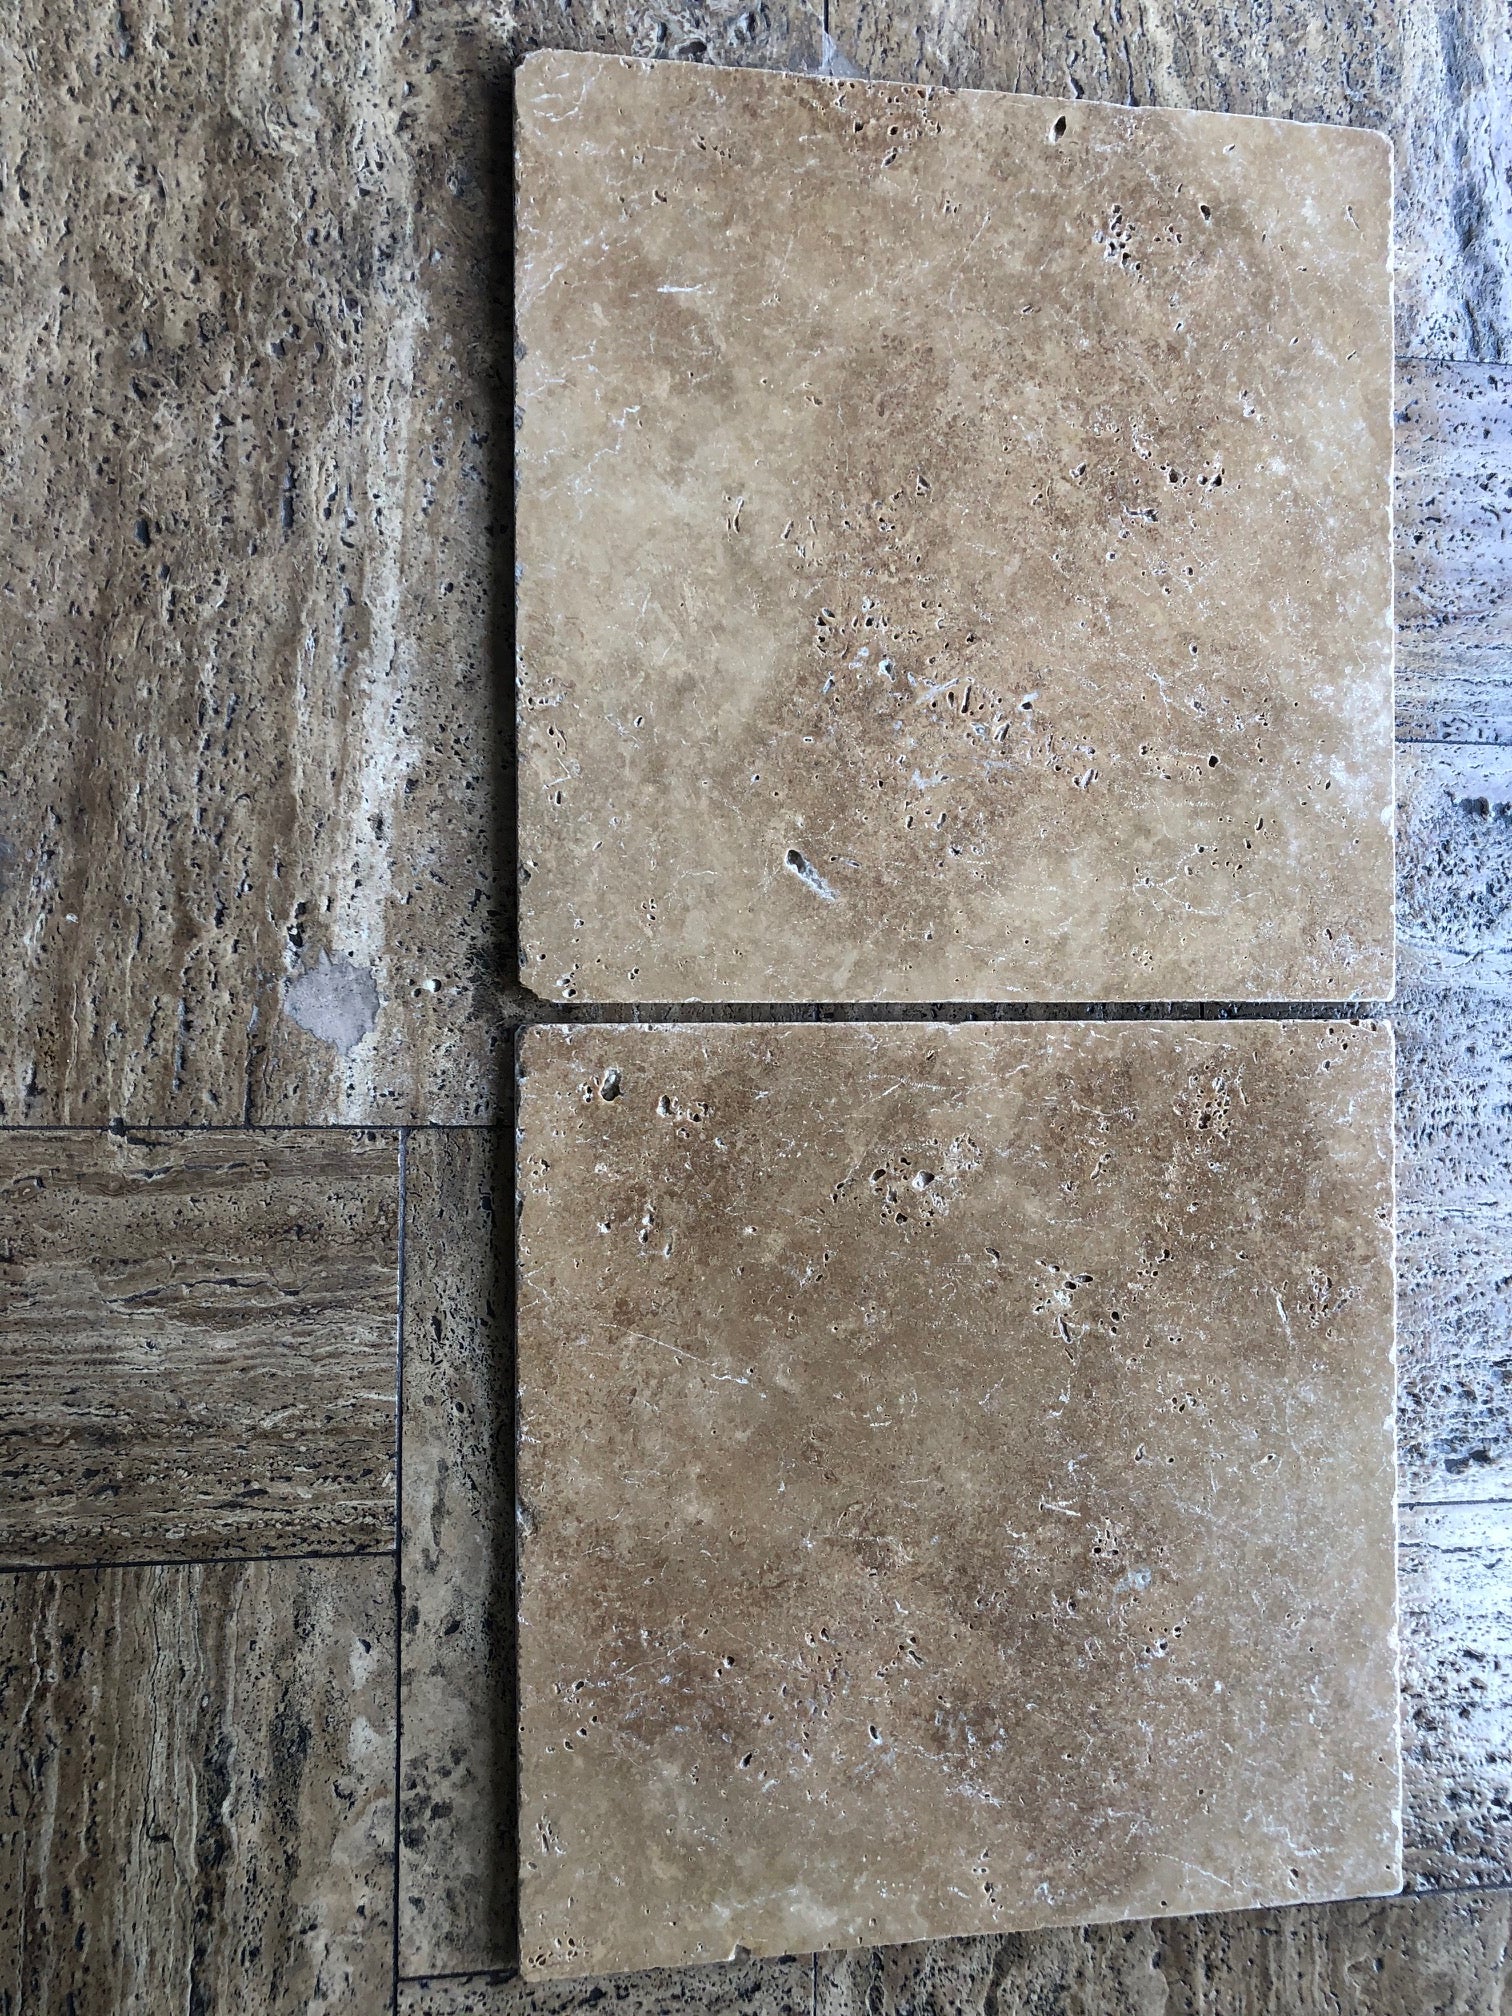 Noce Travertine Tumbled Wall and Floor Tile 18x18"